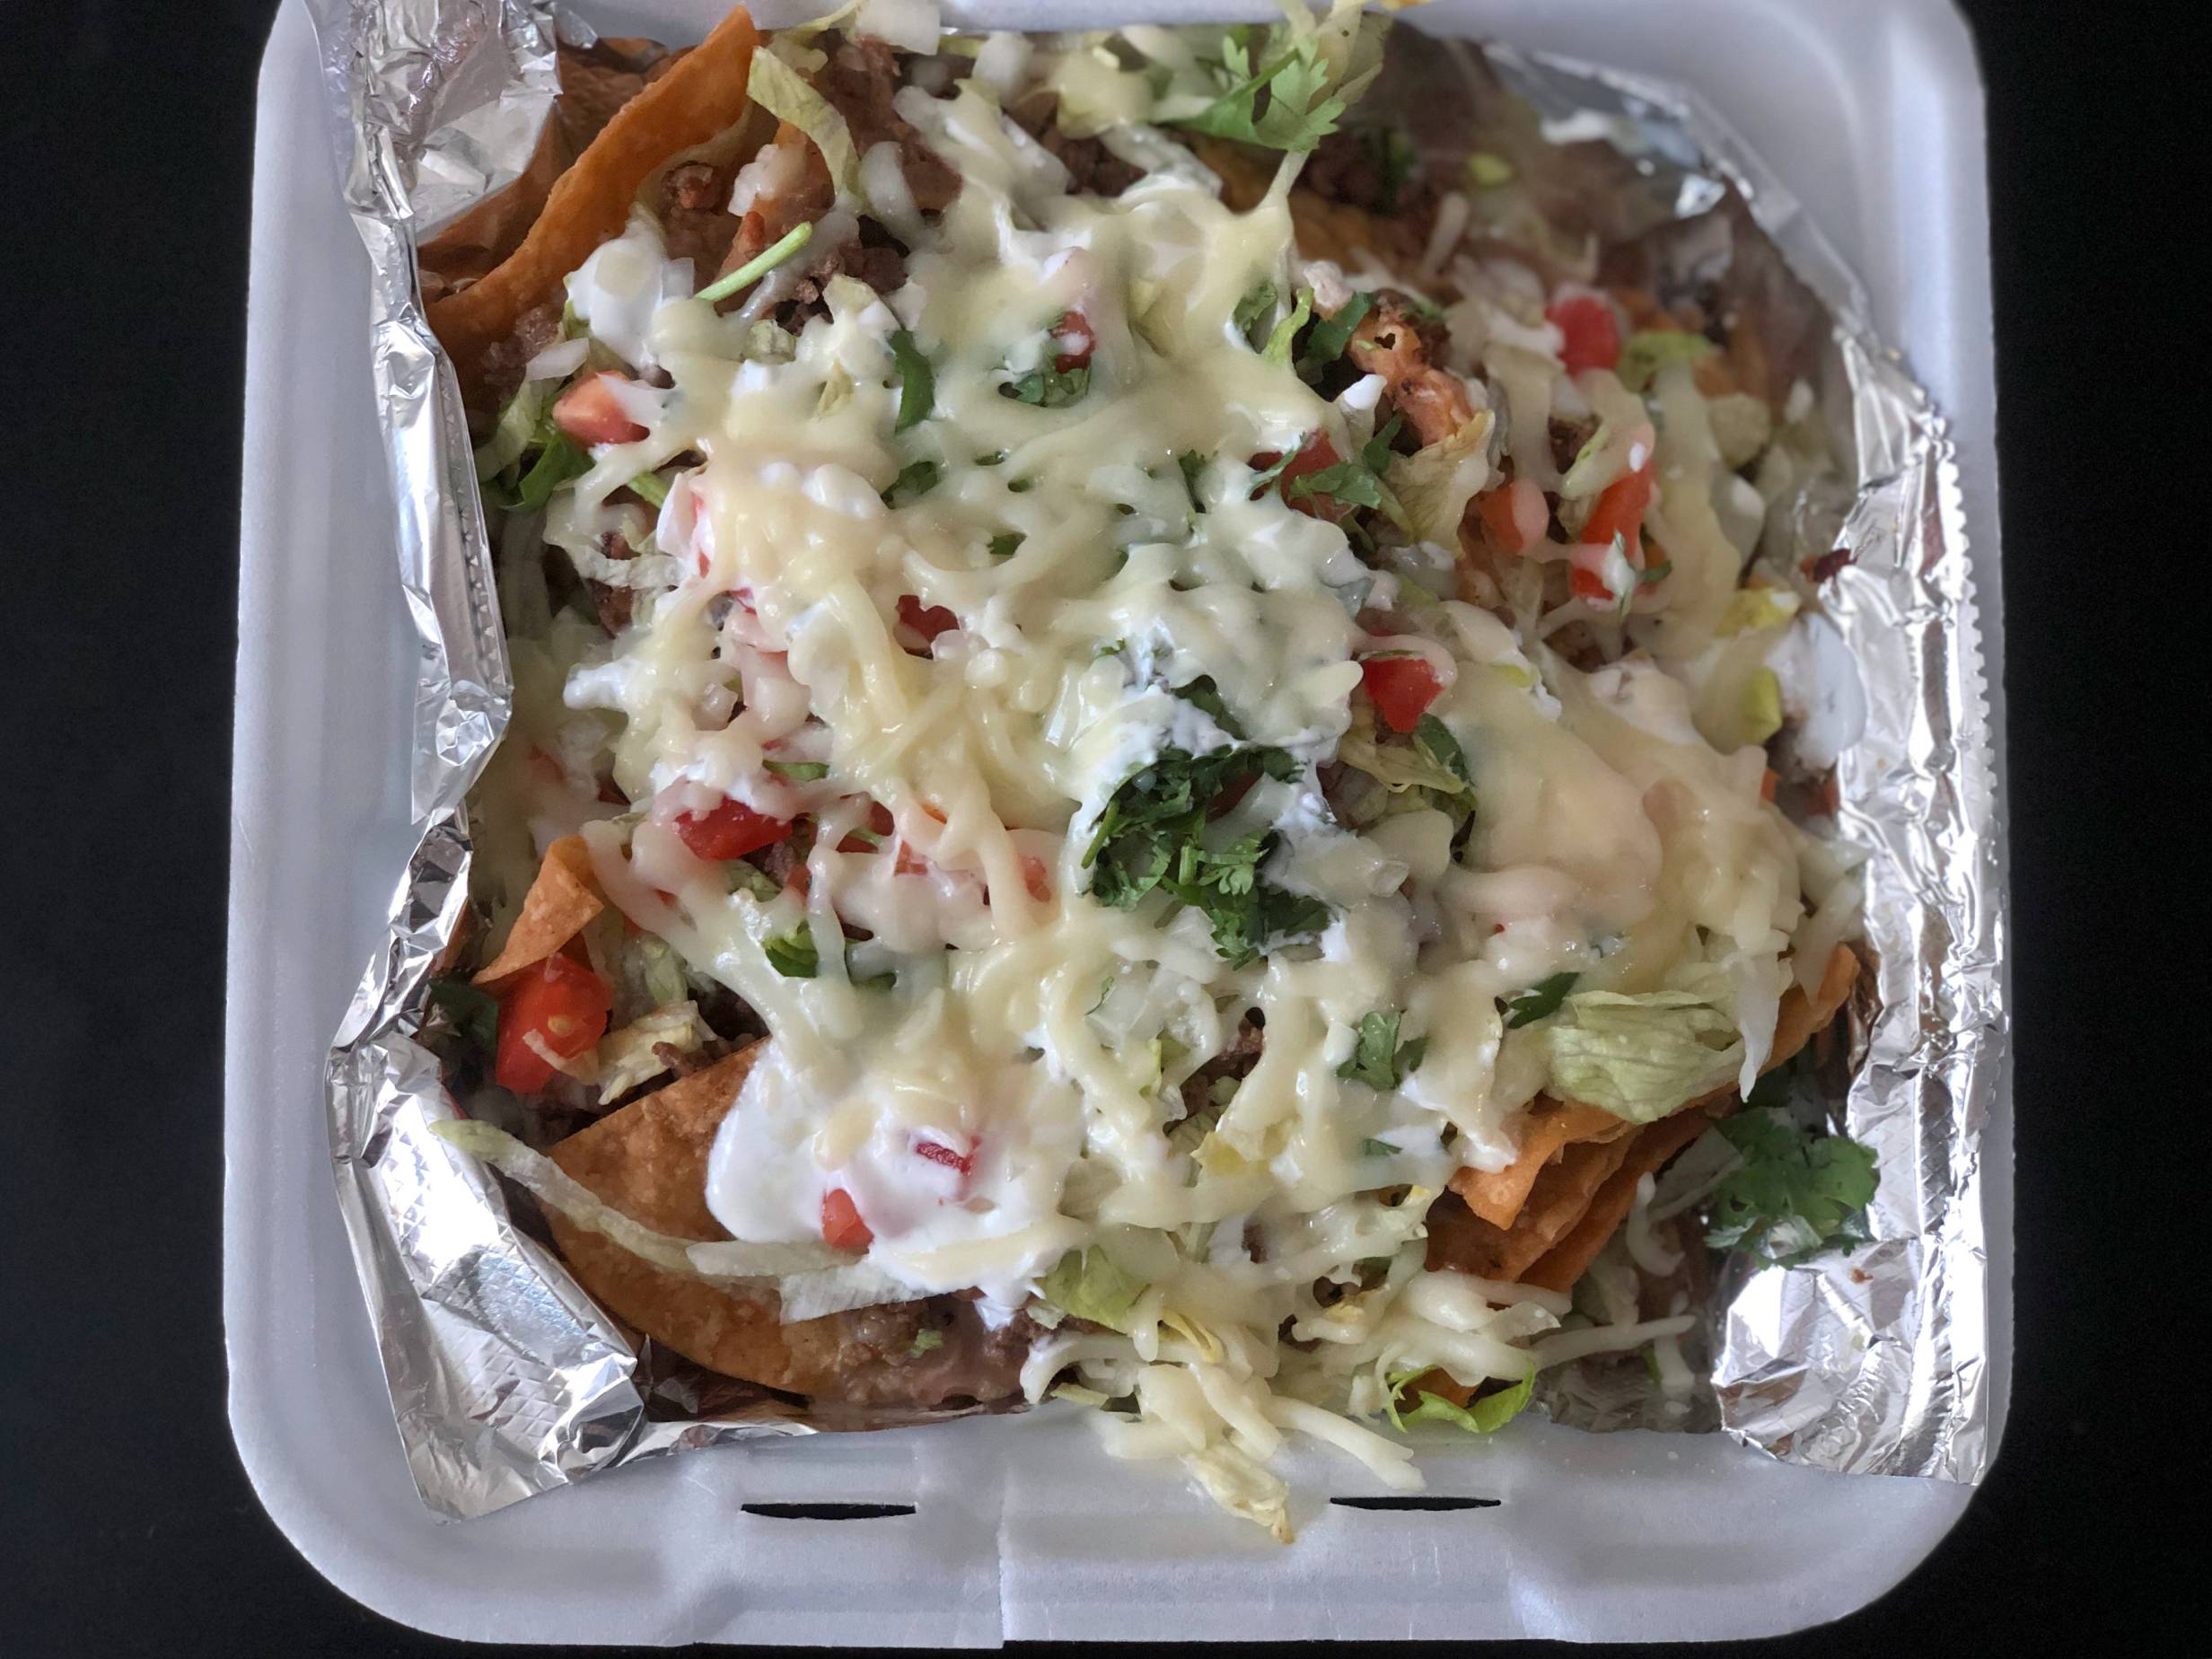 A large, square styrofoam container holds a lot of nachos covered in cheese inside. Photo by Alyssa Buckley.